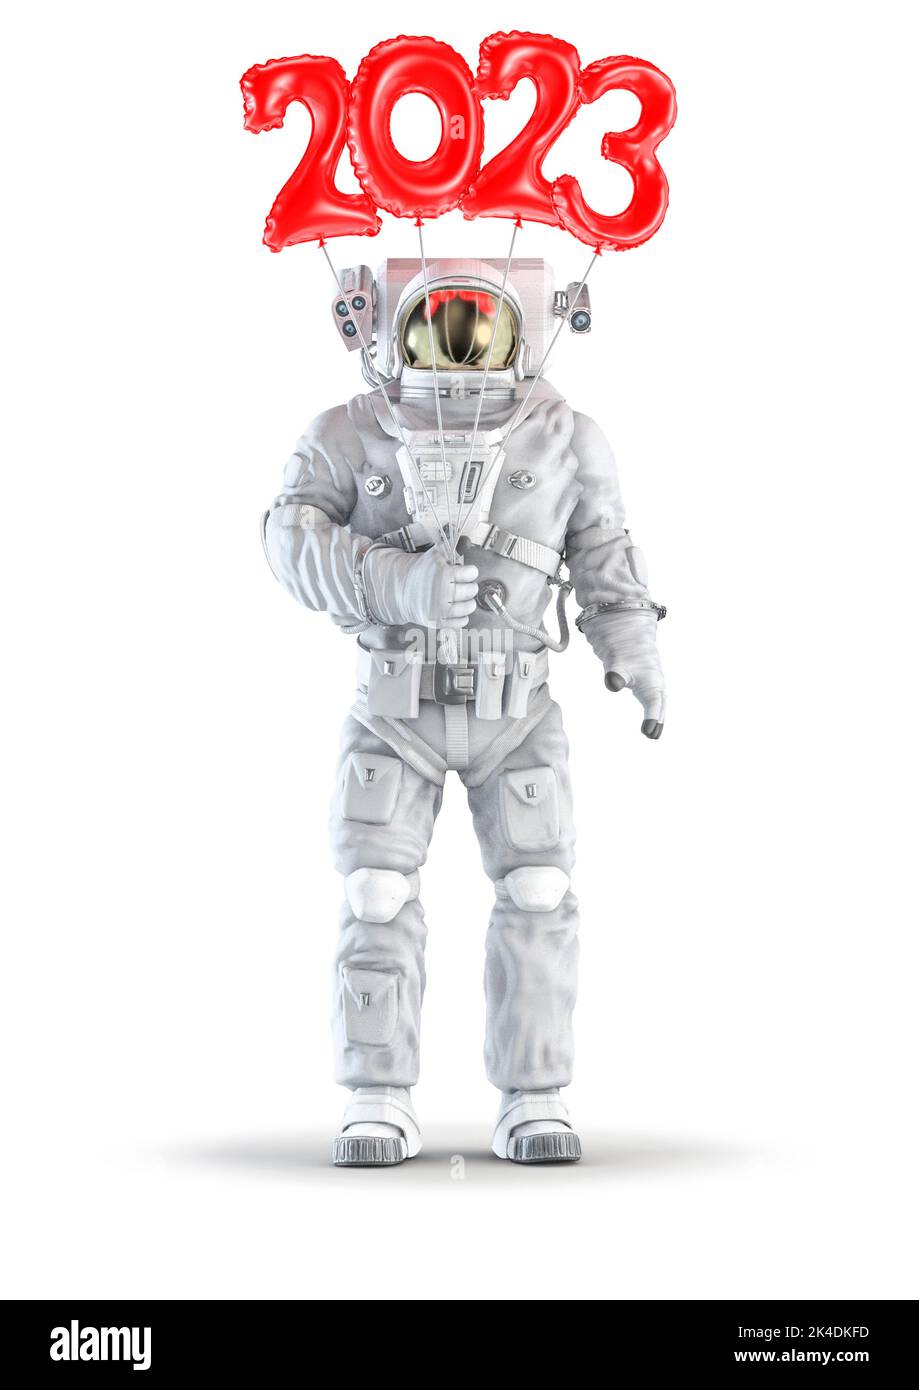 Astronaut with 2023 balloon - 3D illustration of space suit wearing male figure holding red plastic number year 2023 balloons isolated on white studio Stock Photo